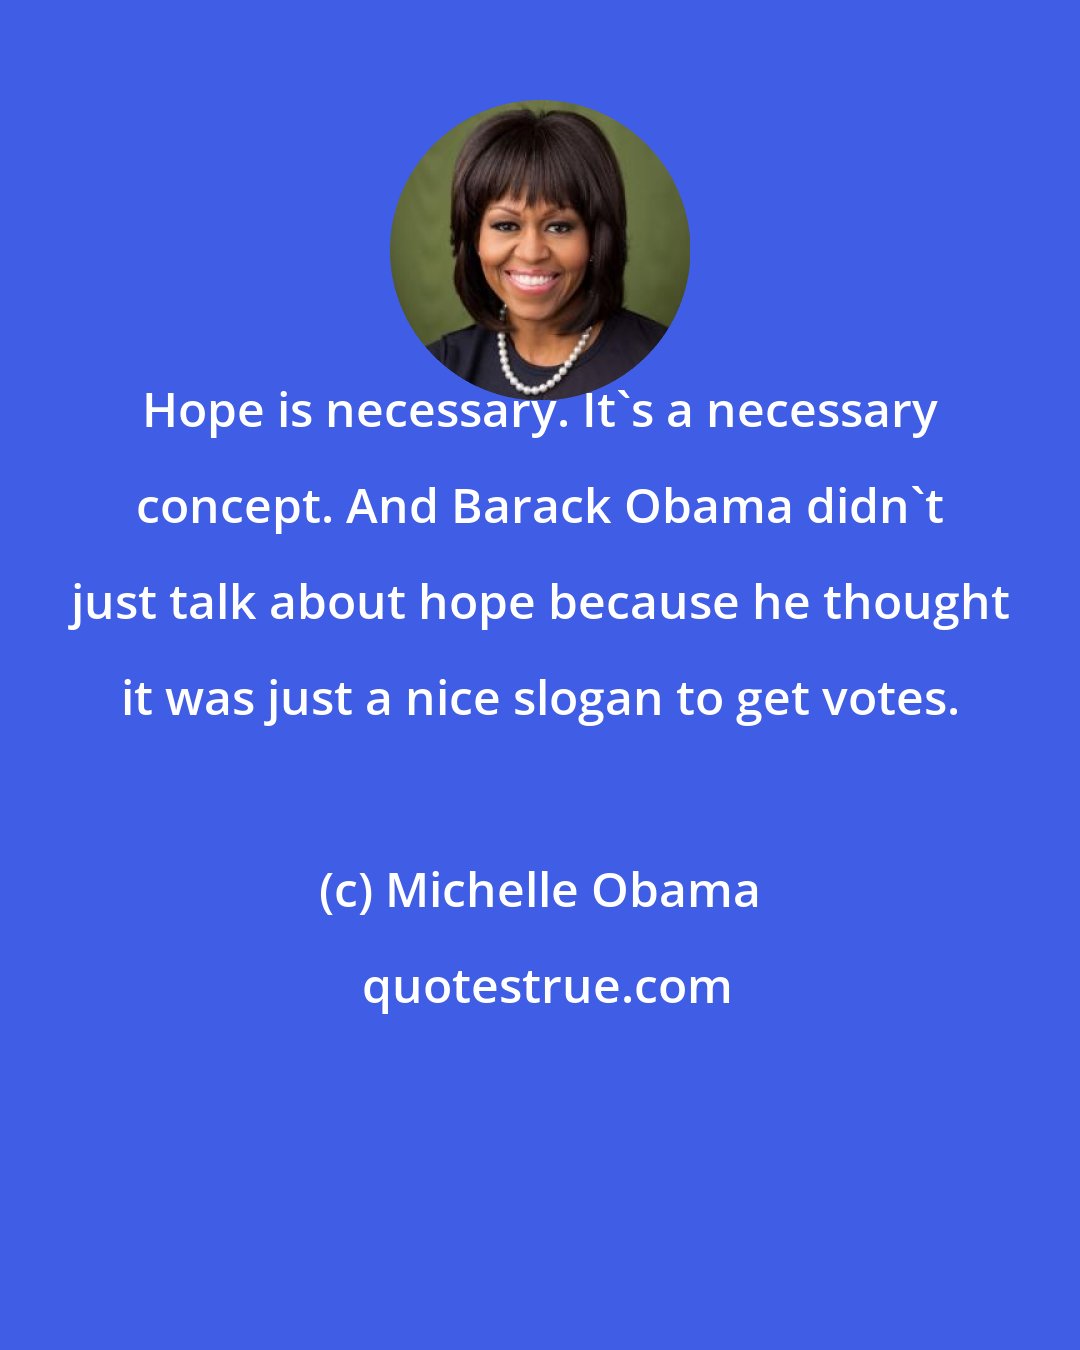 Michelle Obama: Hope is necessary. It's a necessary concept. And Barack Obama didn't just talk about hope because he thought it was just a nice slogan to get votes.